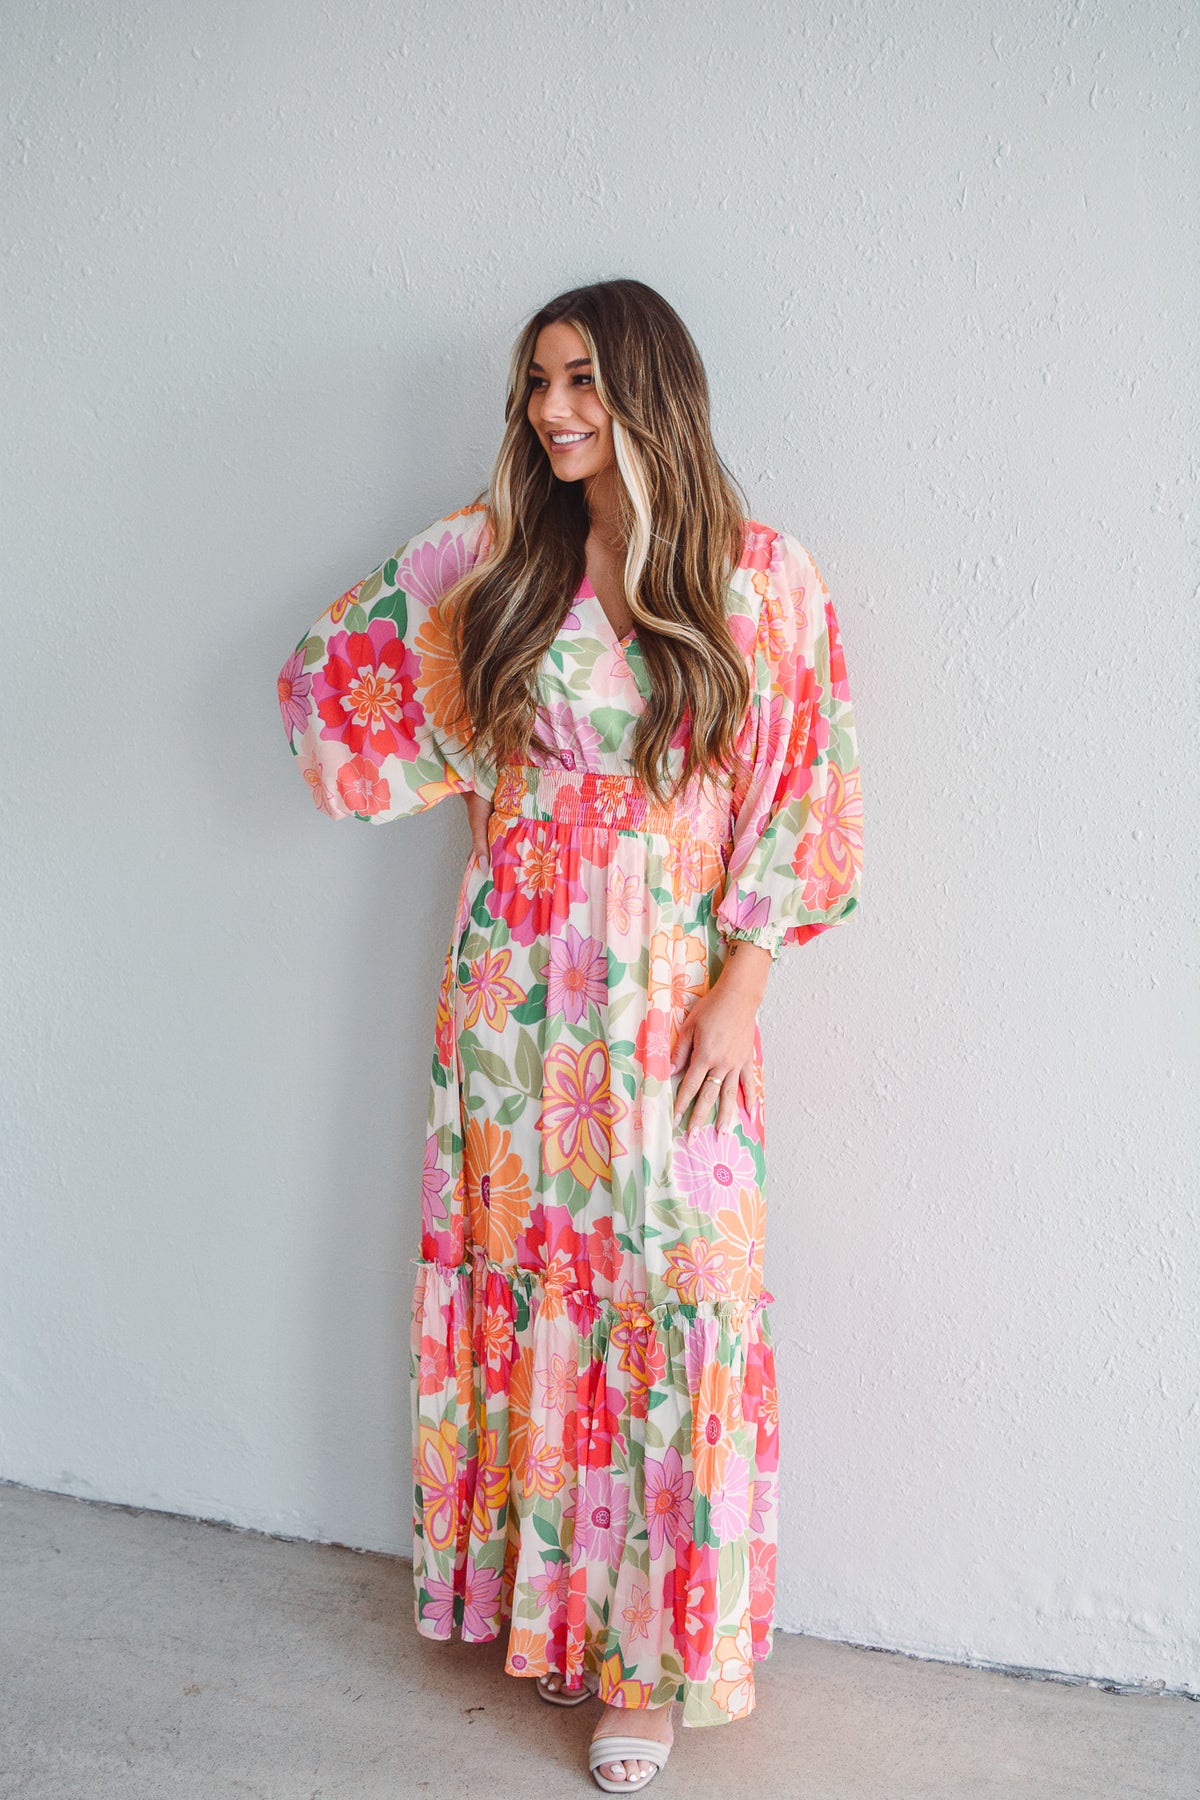 Blooming Love Maxi